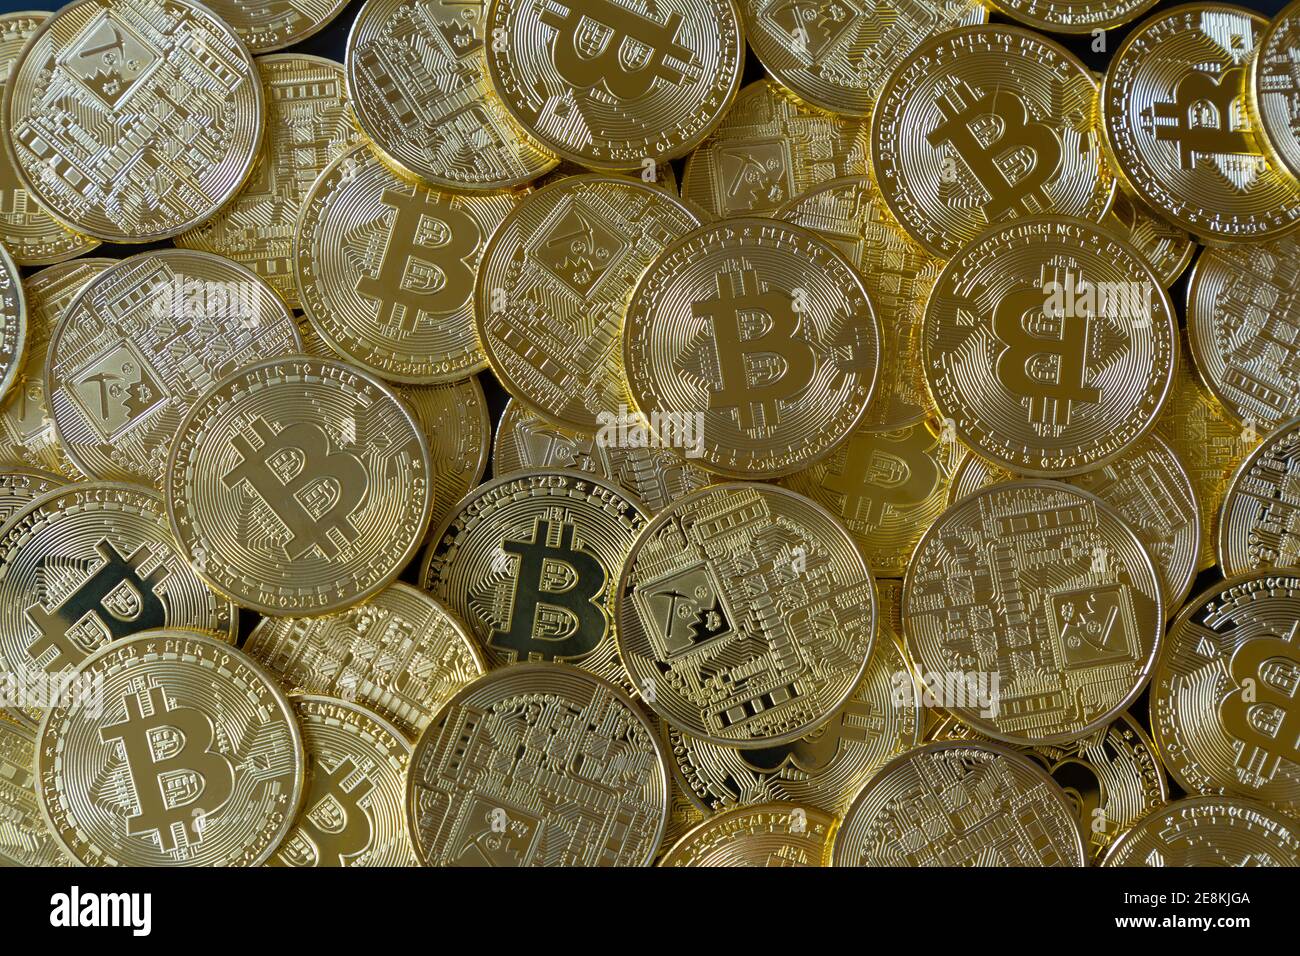 A heap of many golden bitcoins. Cryptocurrency concept Stock Photo